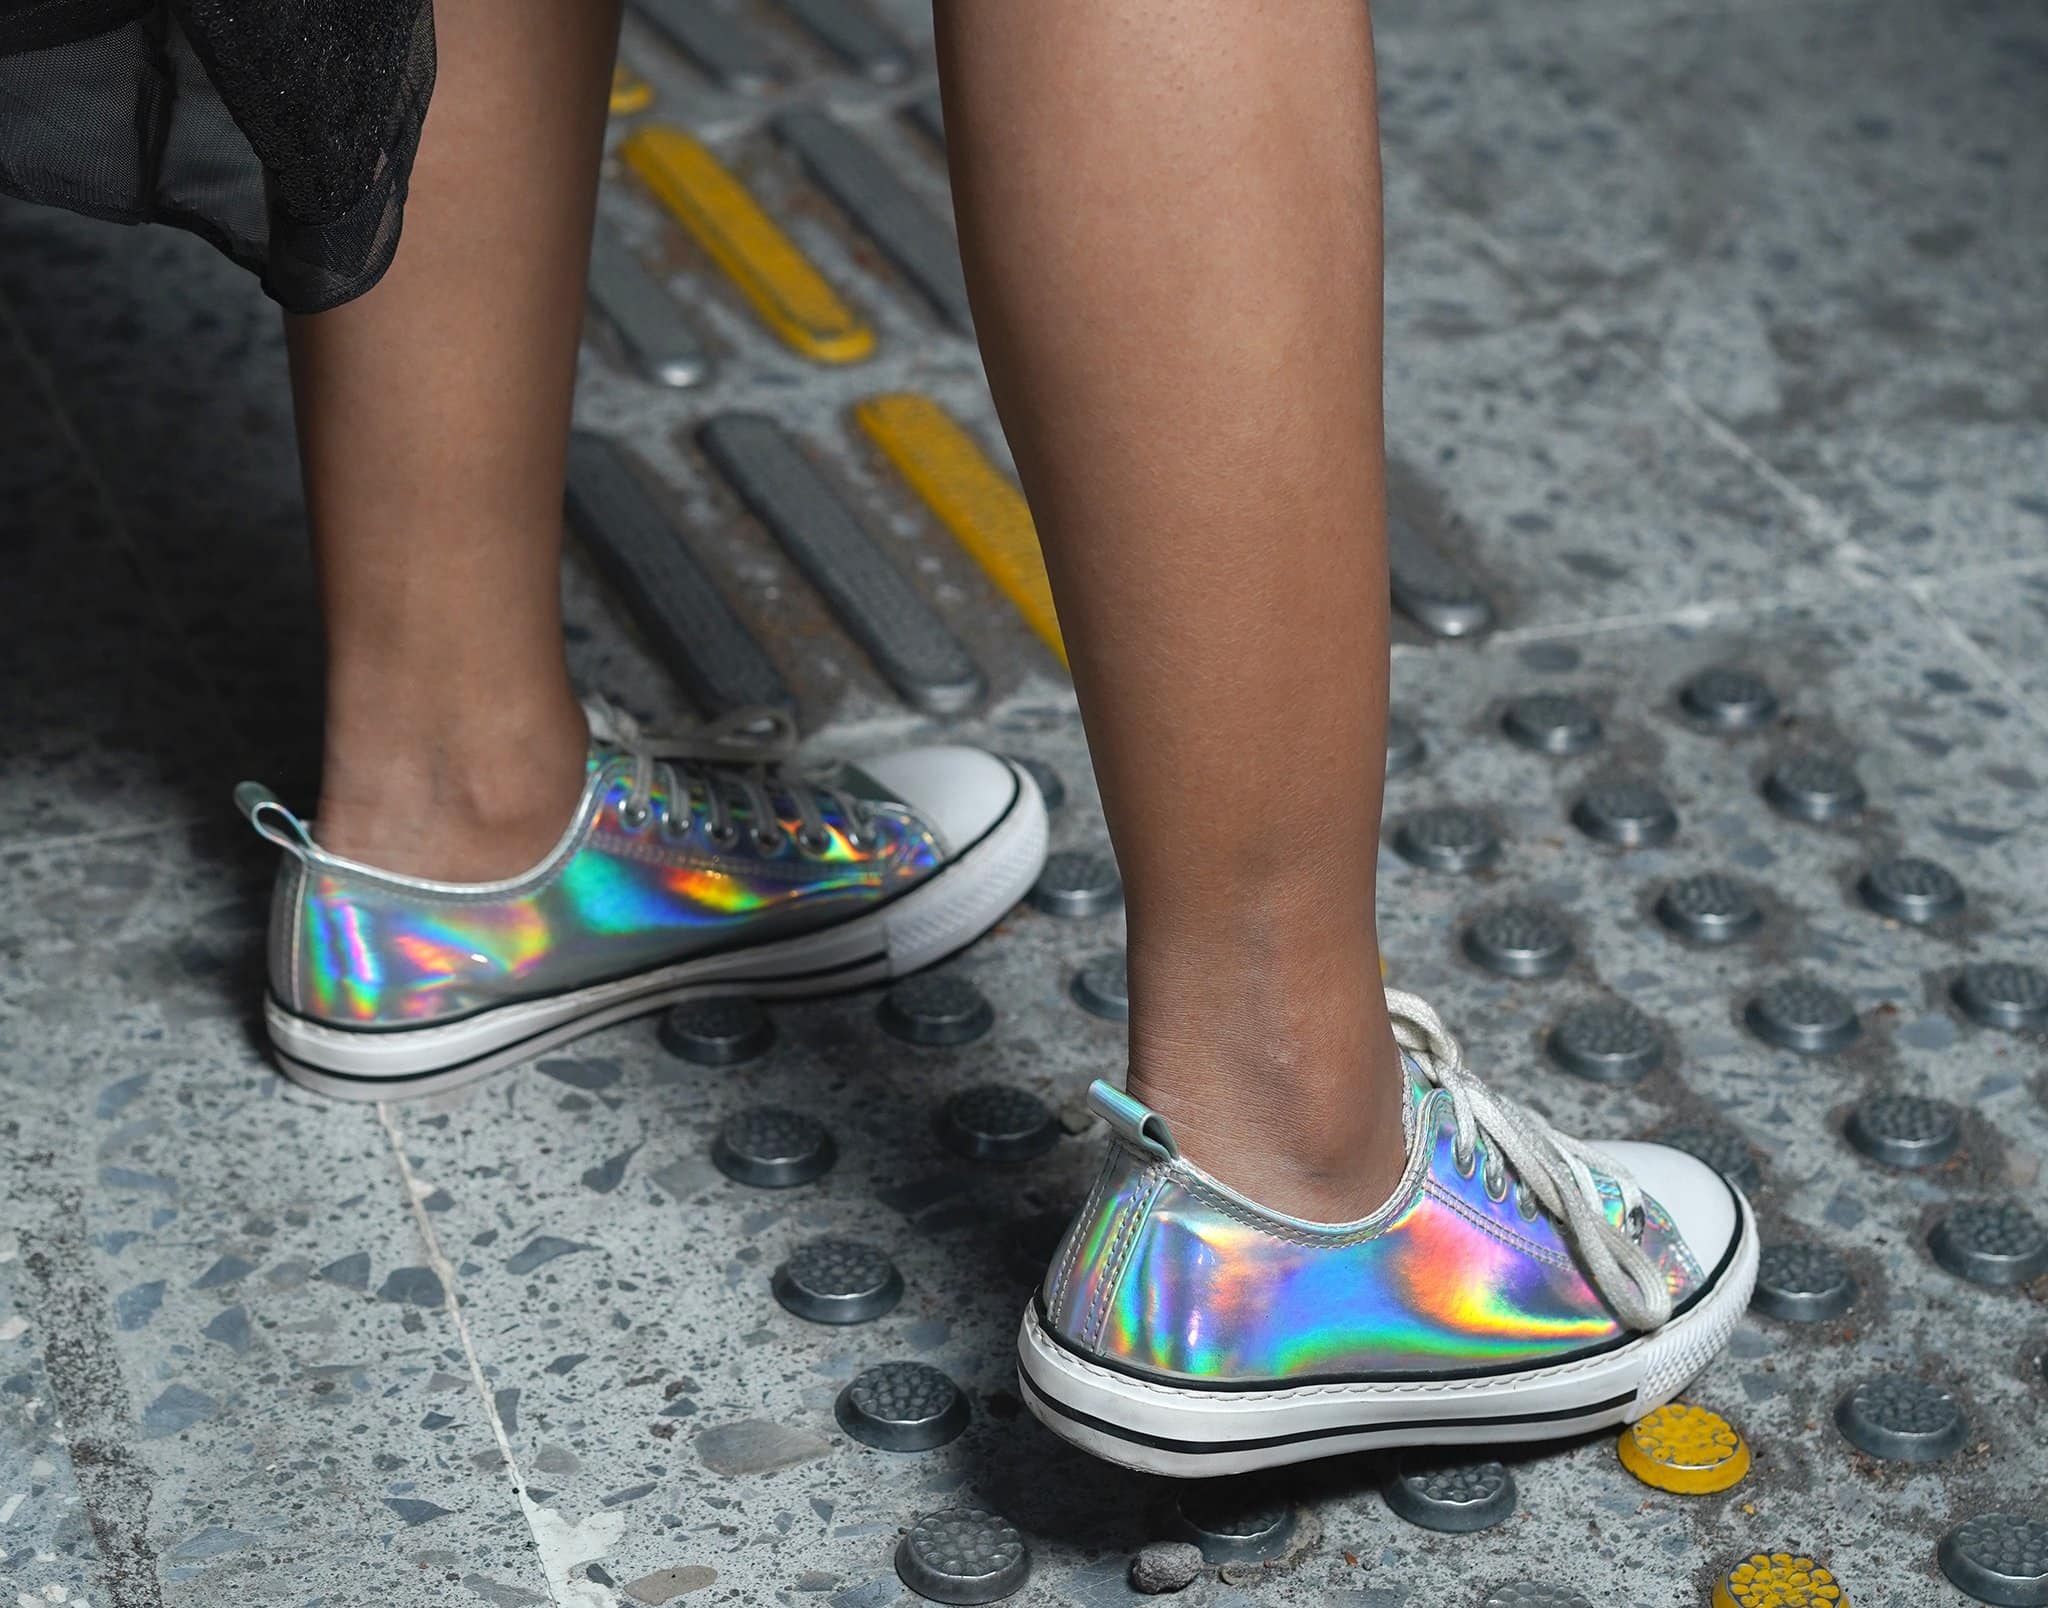 Wearing metallic sneakers is an easy way to add a dose of glam factor to a laid-back outfit